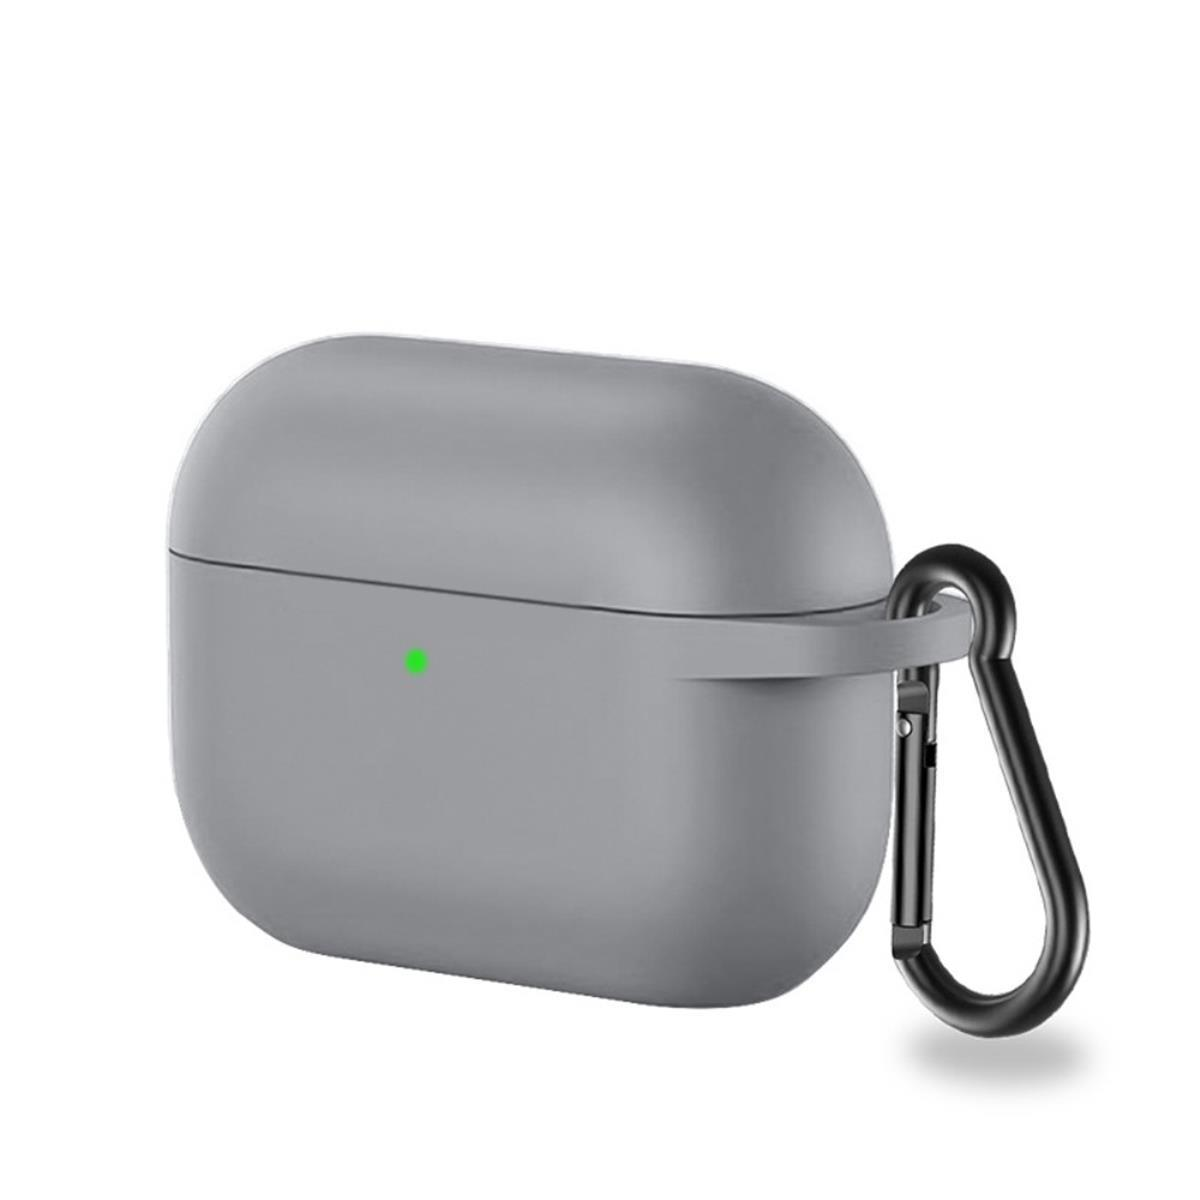 Grau, COVERKINGZ für Ladecase 75424 Unisex, Silikoncover Apple AirPods Pro